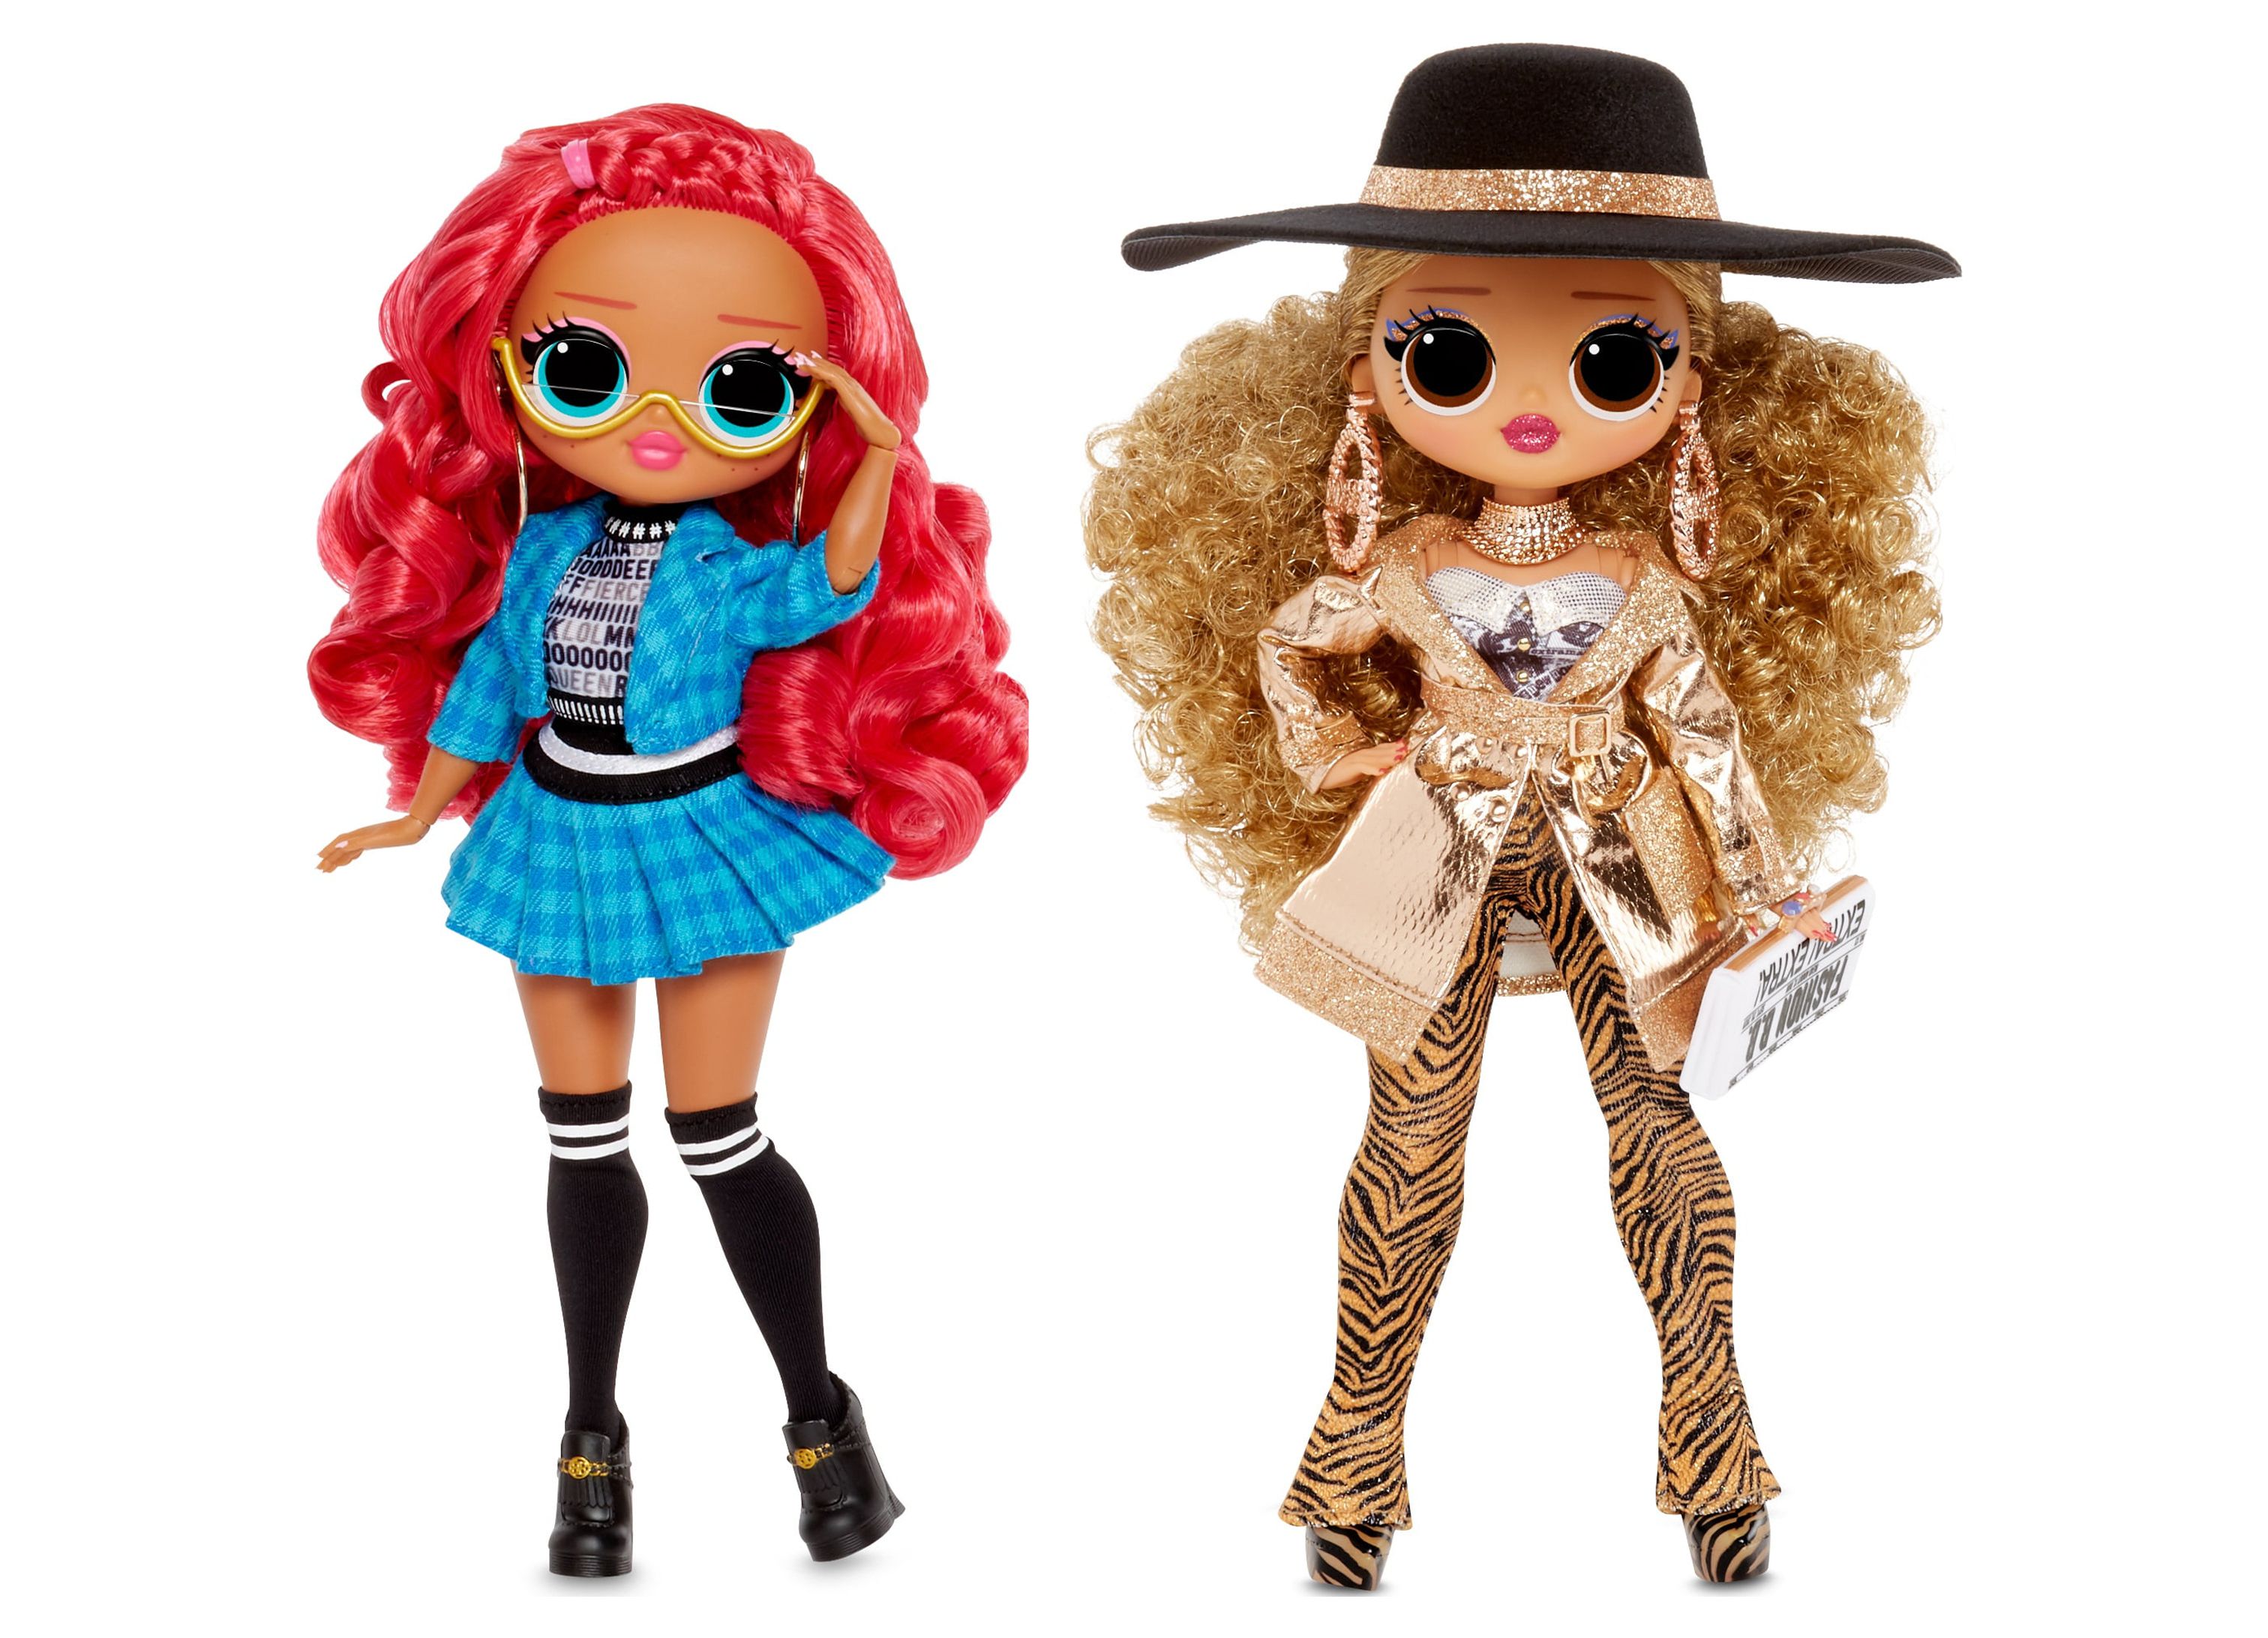 LOL Surprise OMG 2-Pack – Da Boss & Class Prez Fashion Dolls 2-Pack with 20 Surprises Each, Stylish Fashion Outfits and Doll Accessories - image 1 of 8